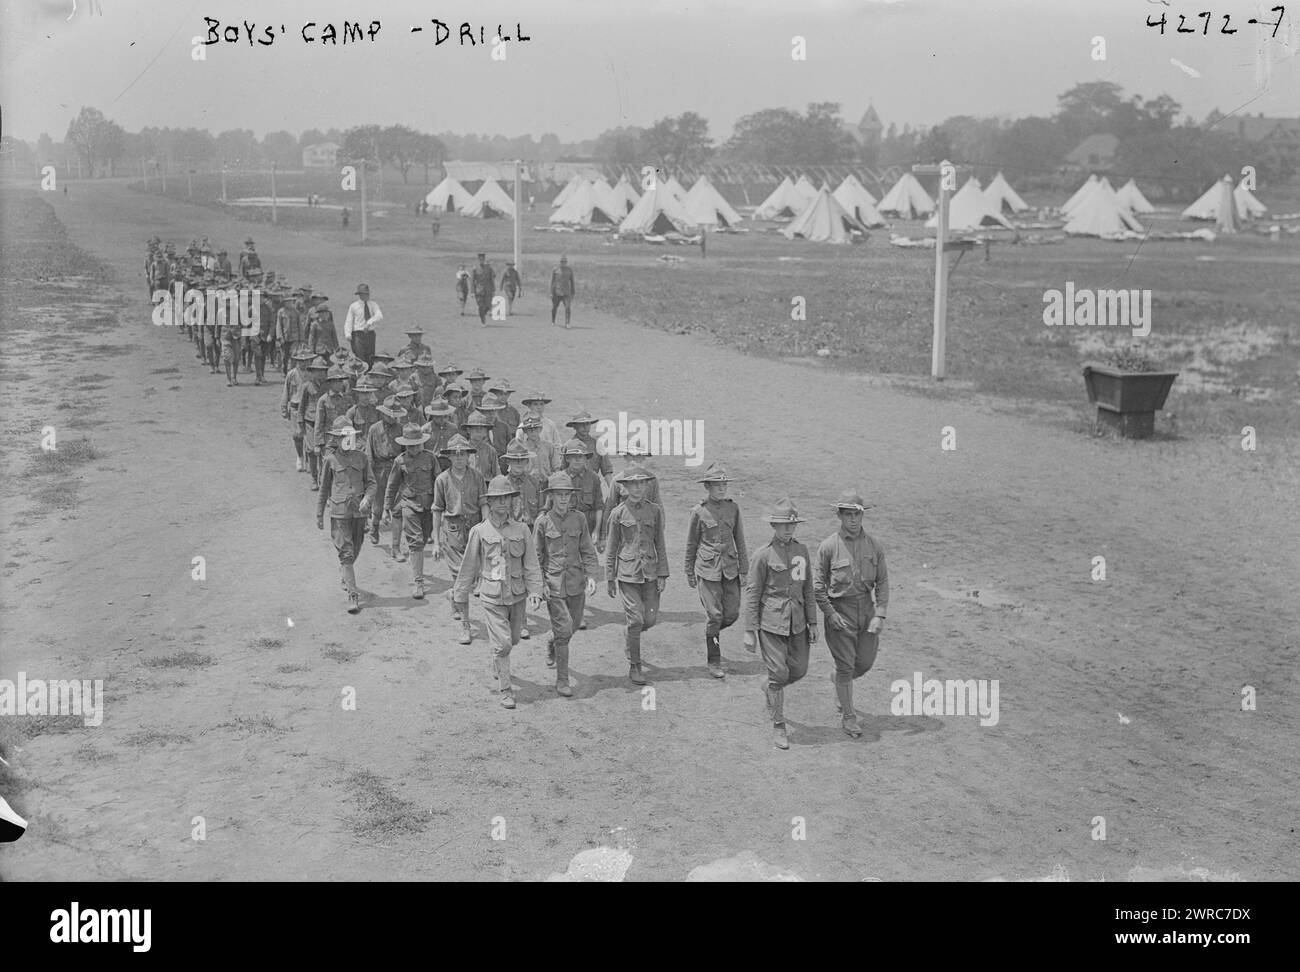 Boy's camp - drill, Photograph shows boys drilling at the summer military training camp for boys at Peekskill, New York. The camp was organized by the New York State Military Training Commission., 1917 July 16, Glass negatives, 1 negative: glass Stock Photo